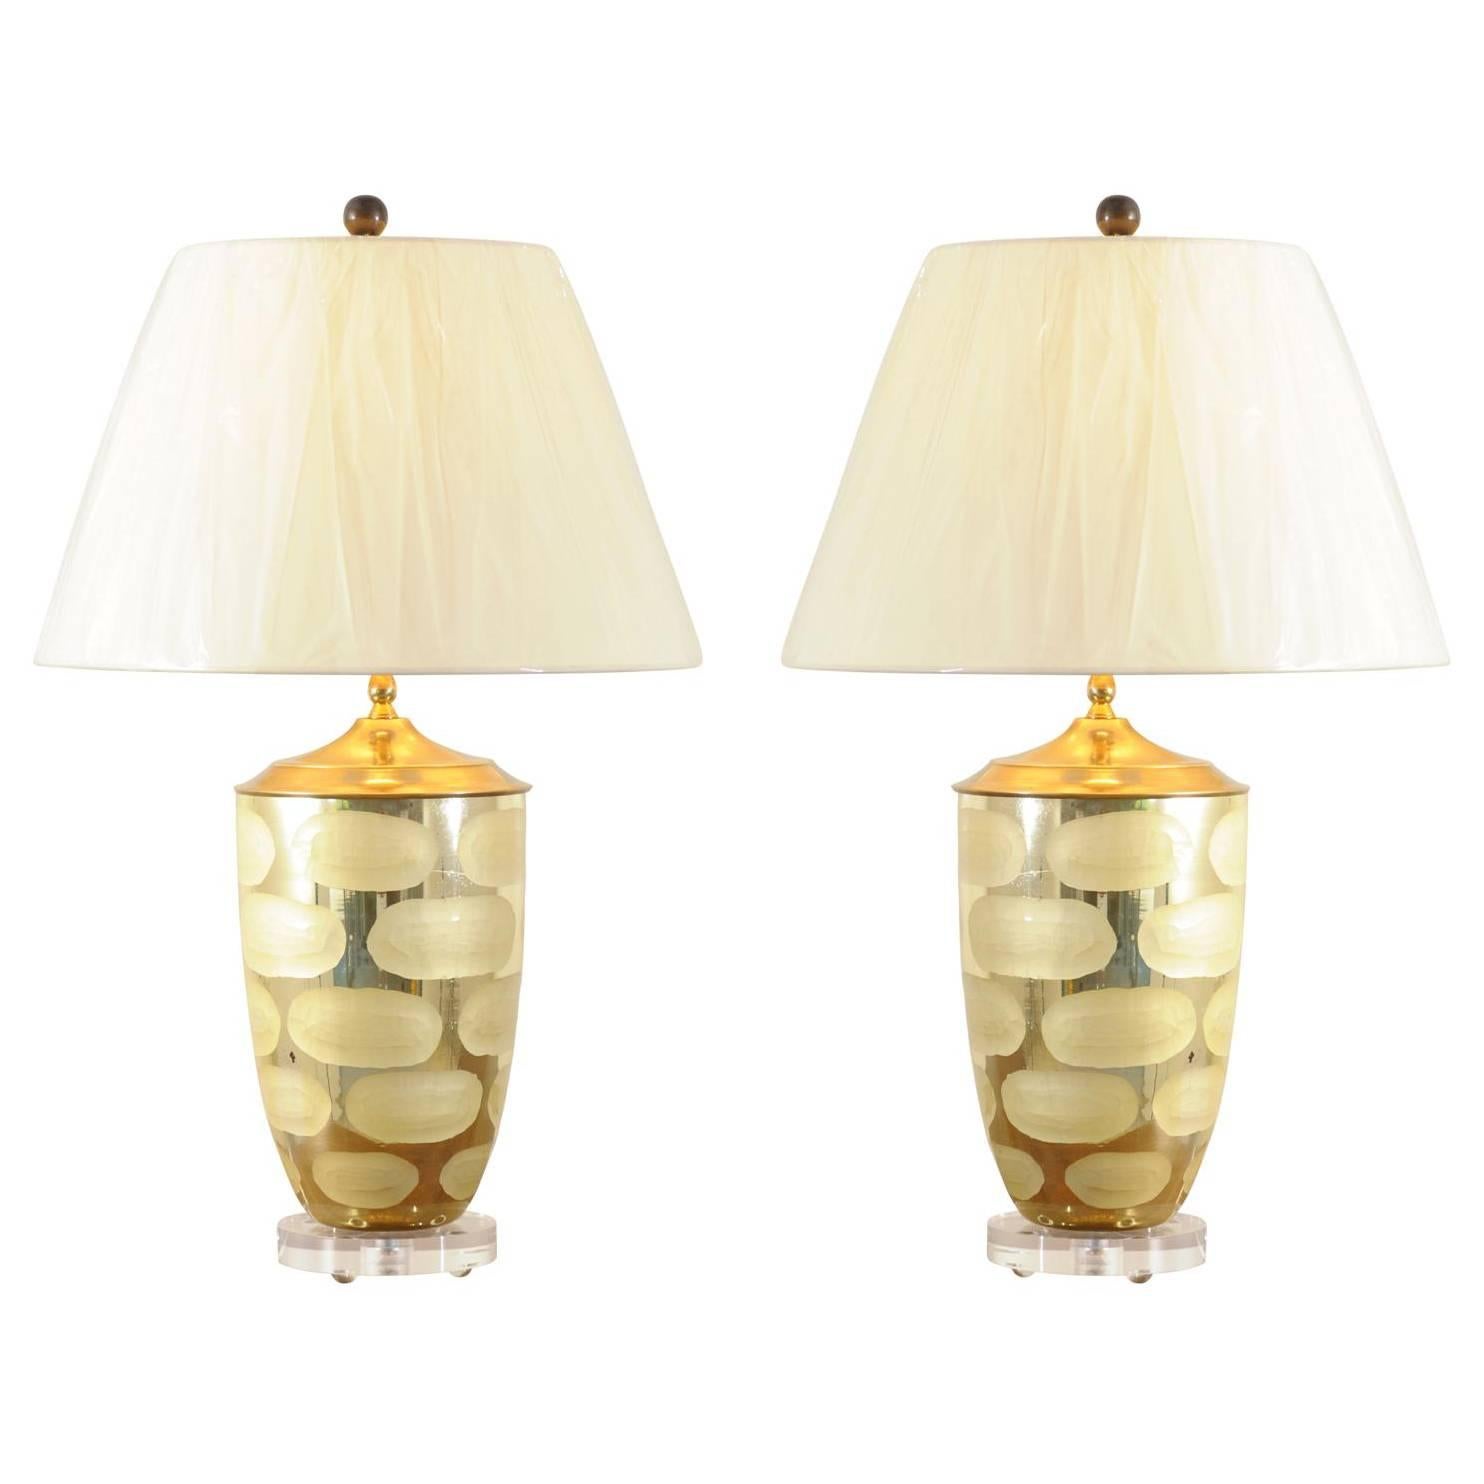 Pair of Spotted Mercury Glass Lamps